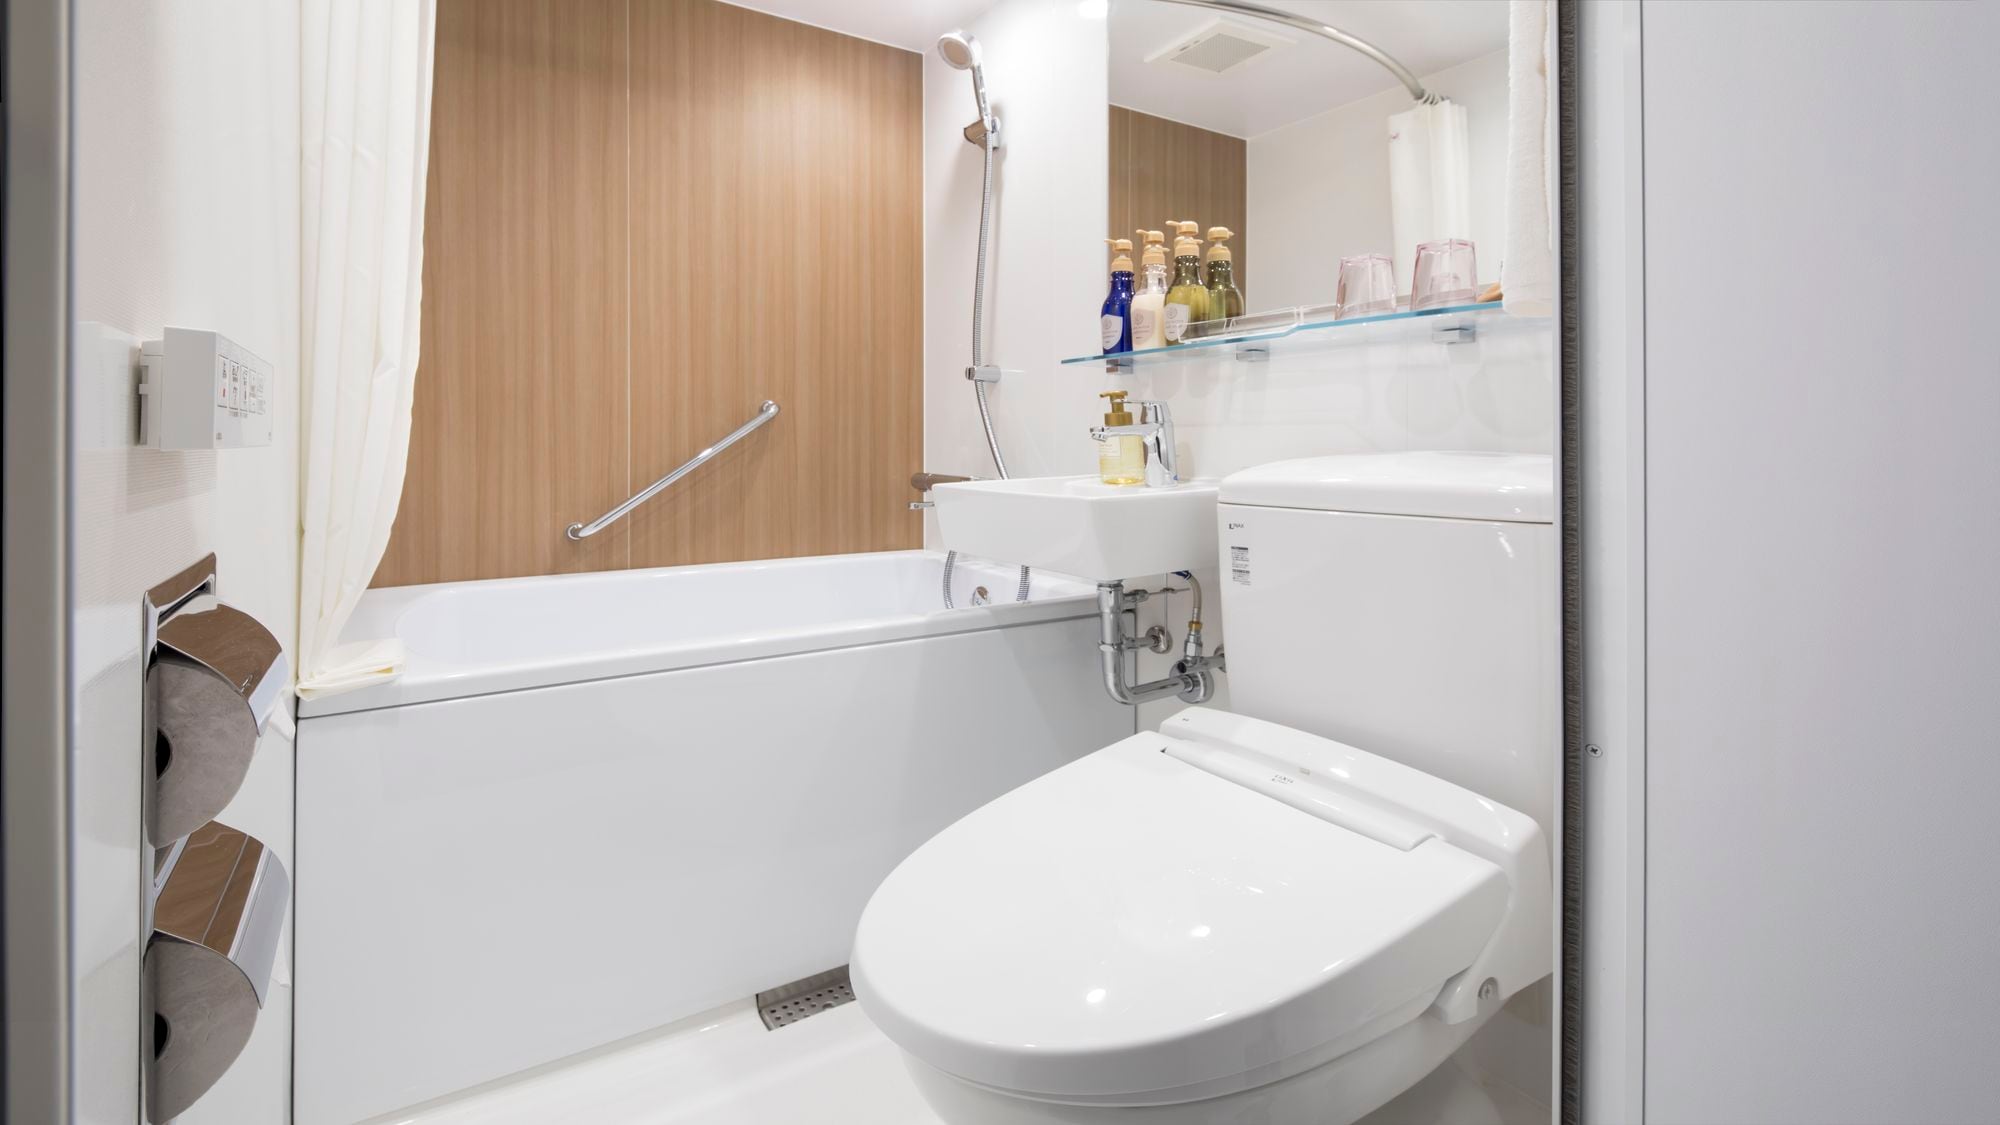 An example of a standard room unit bath